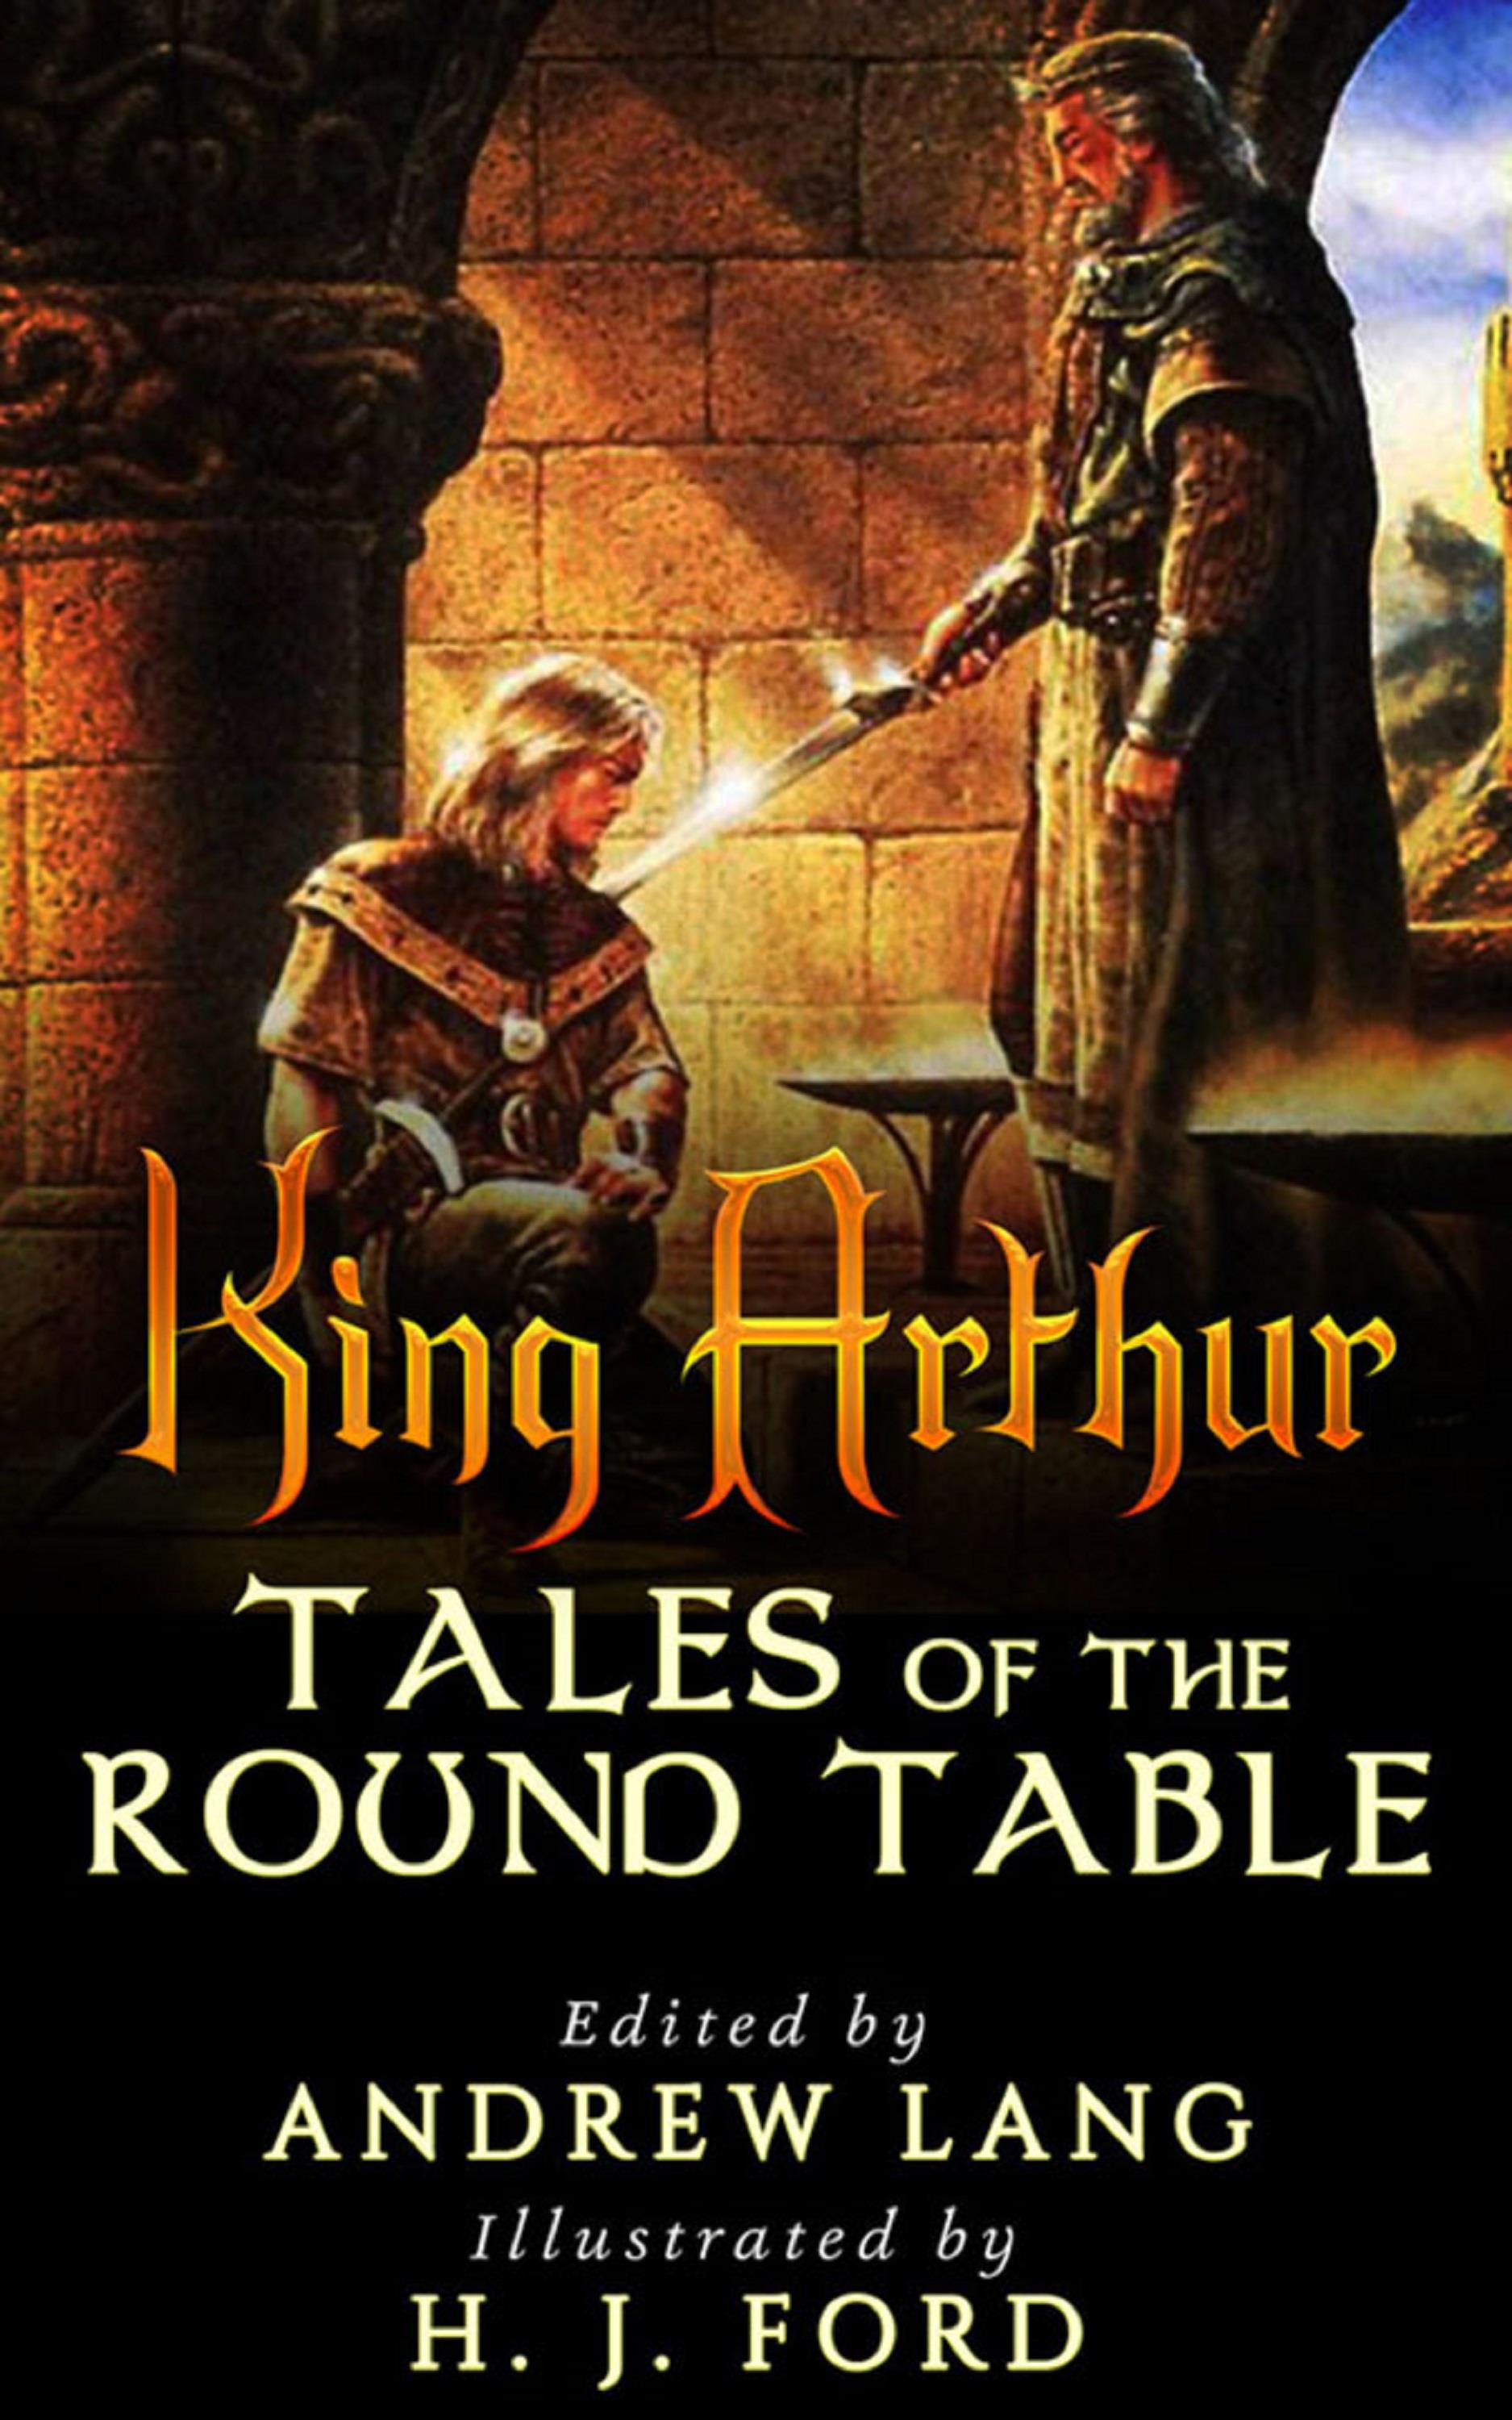 King Arthur - Tales of the Round Table